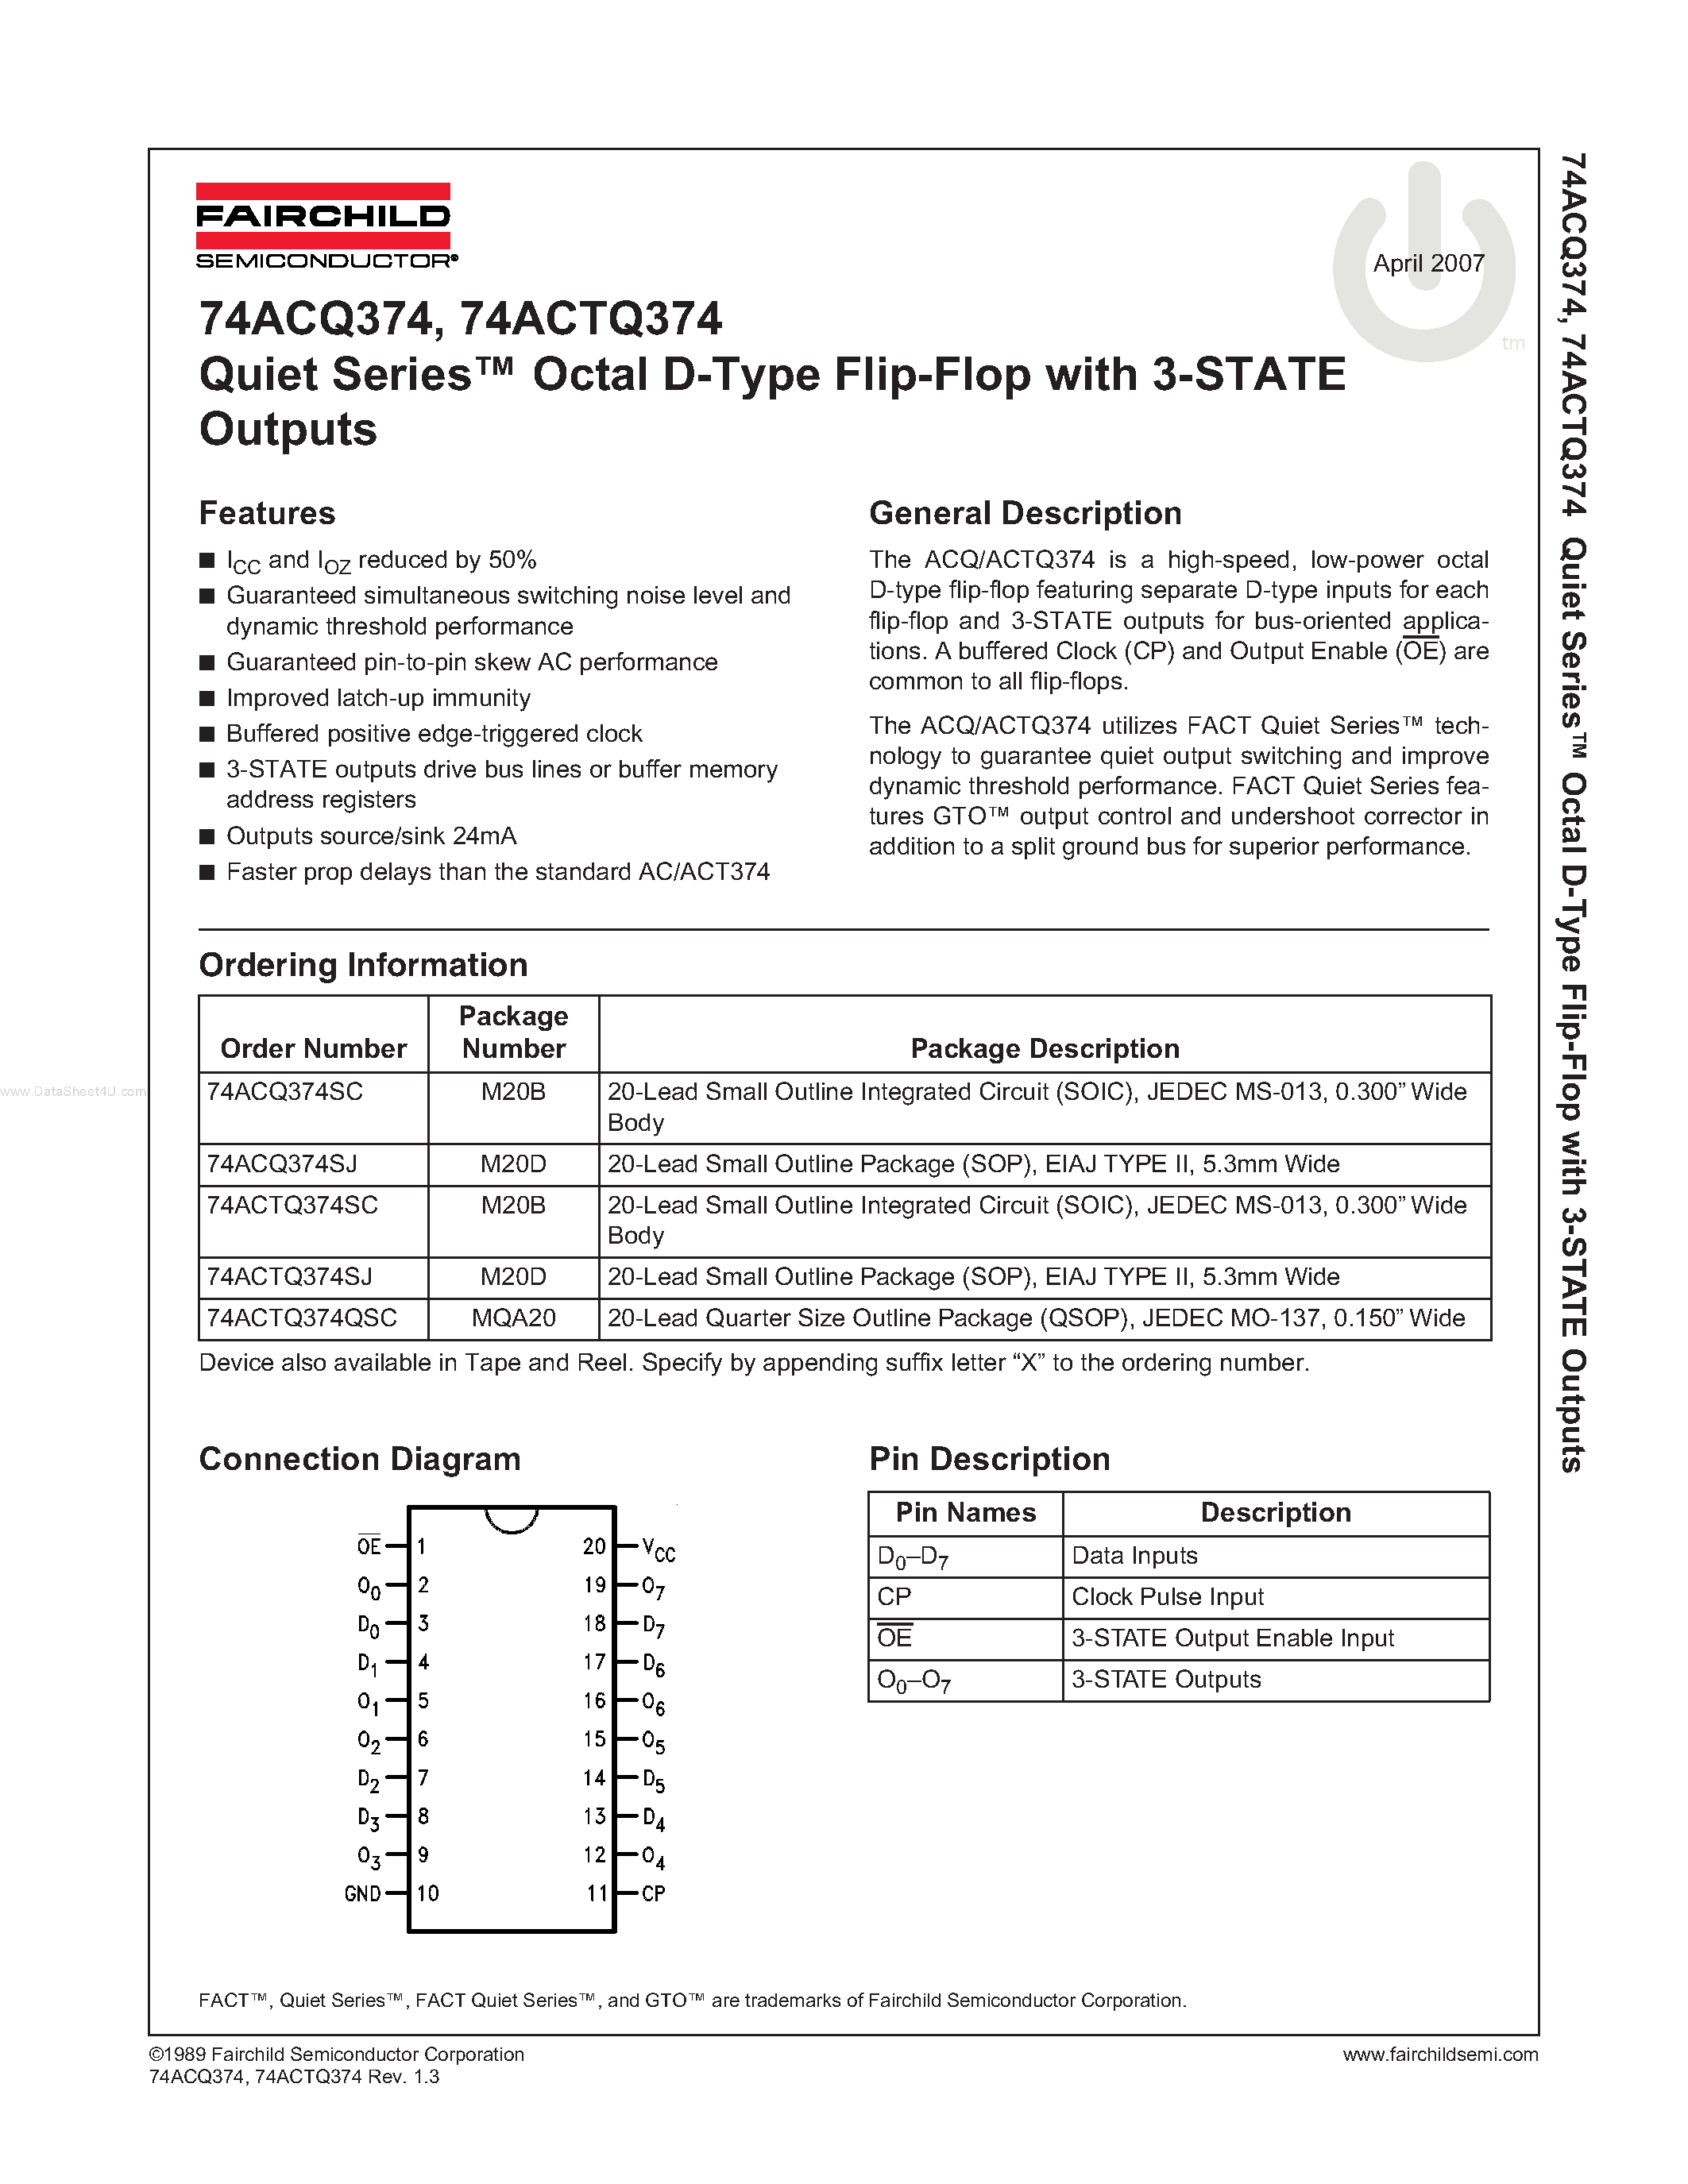 Datasheet 74ACQ374PC - Quiet Series Octal D-Type Flip-Flop with 3-STATE Outputs page 1